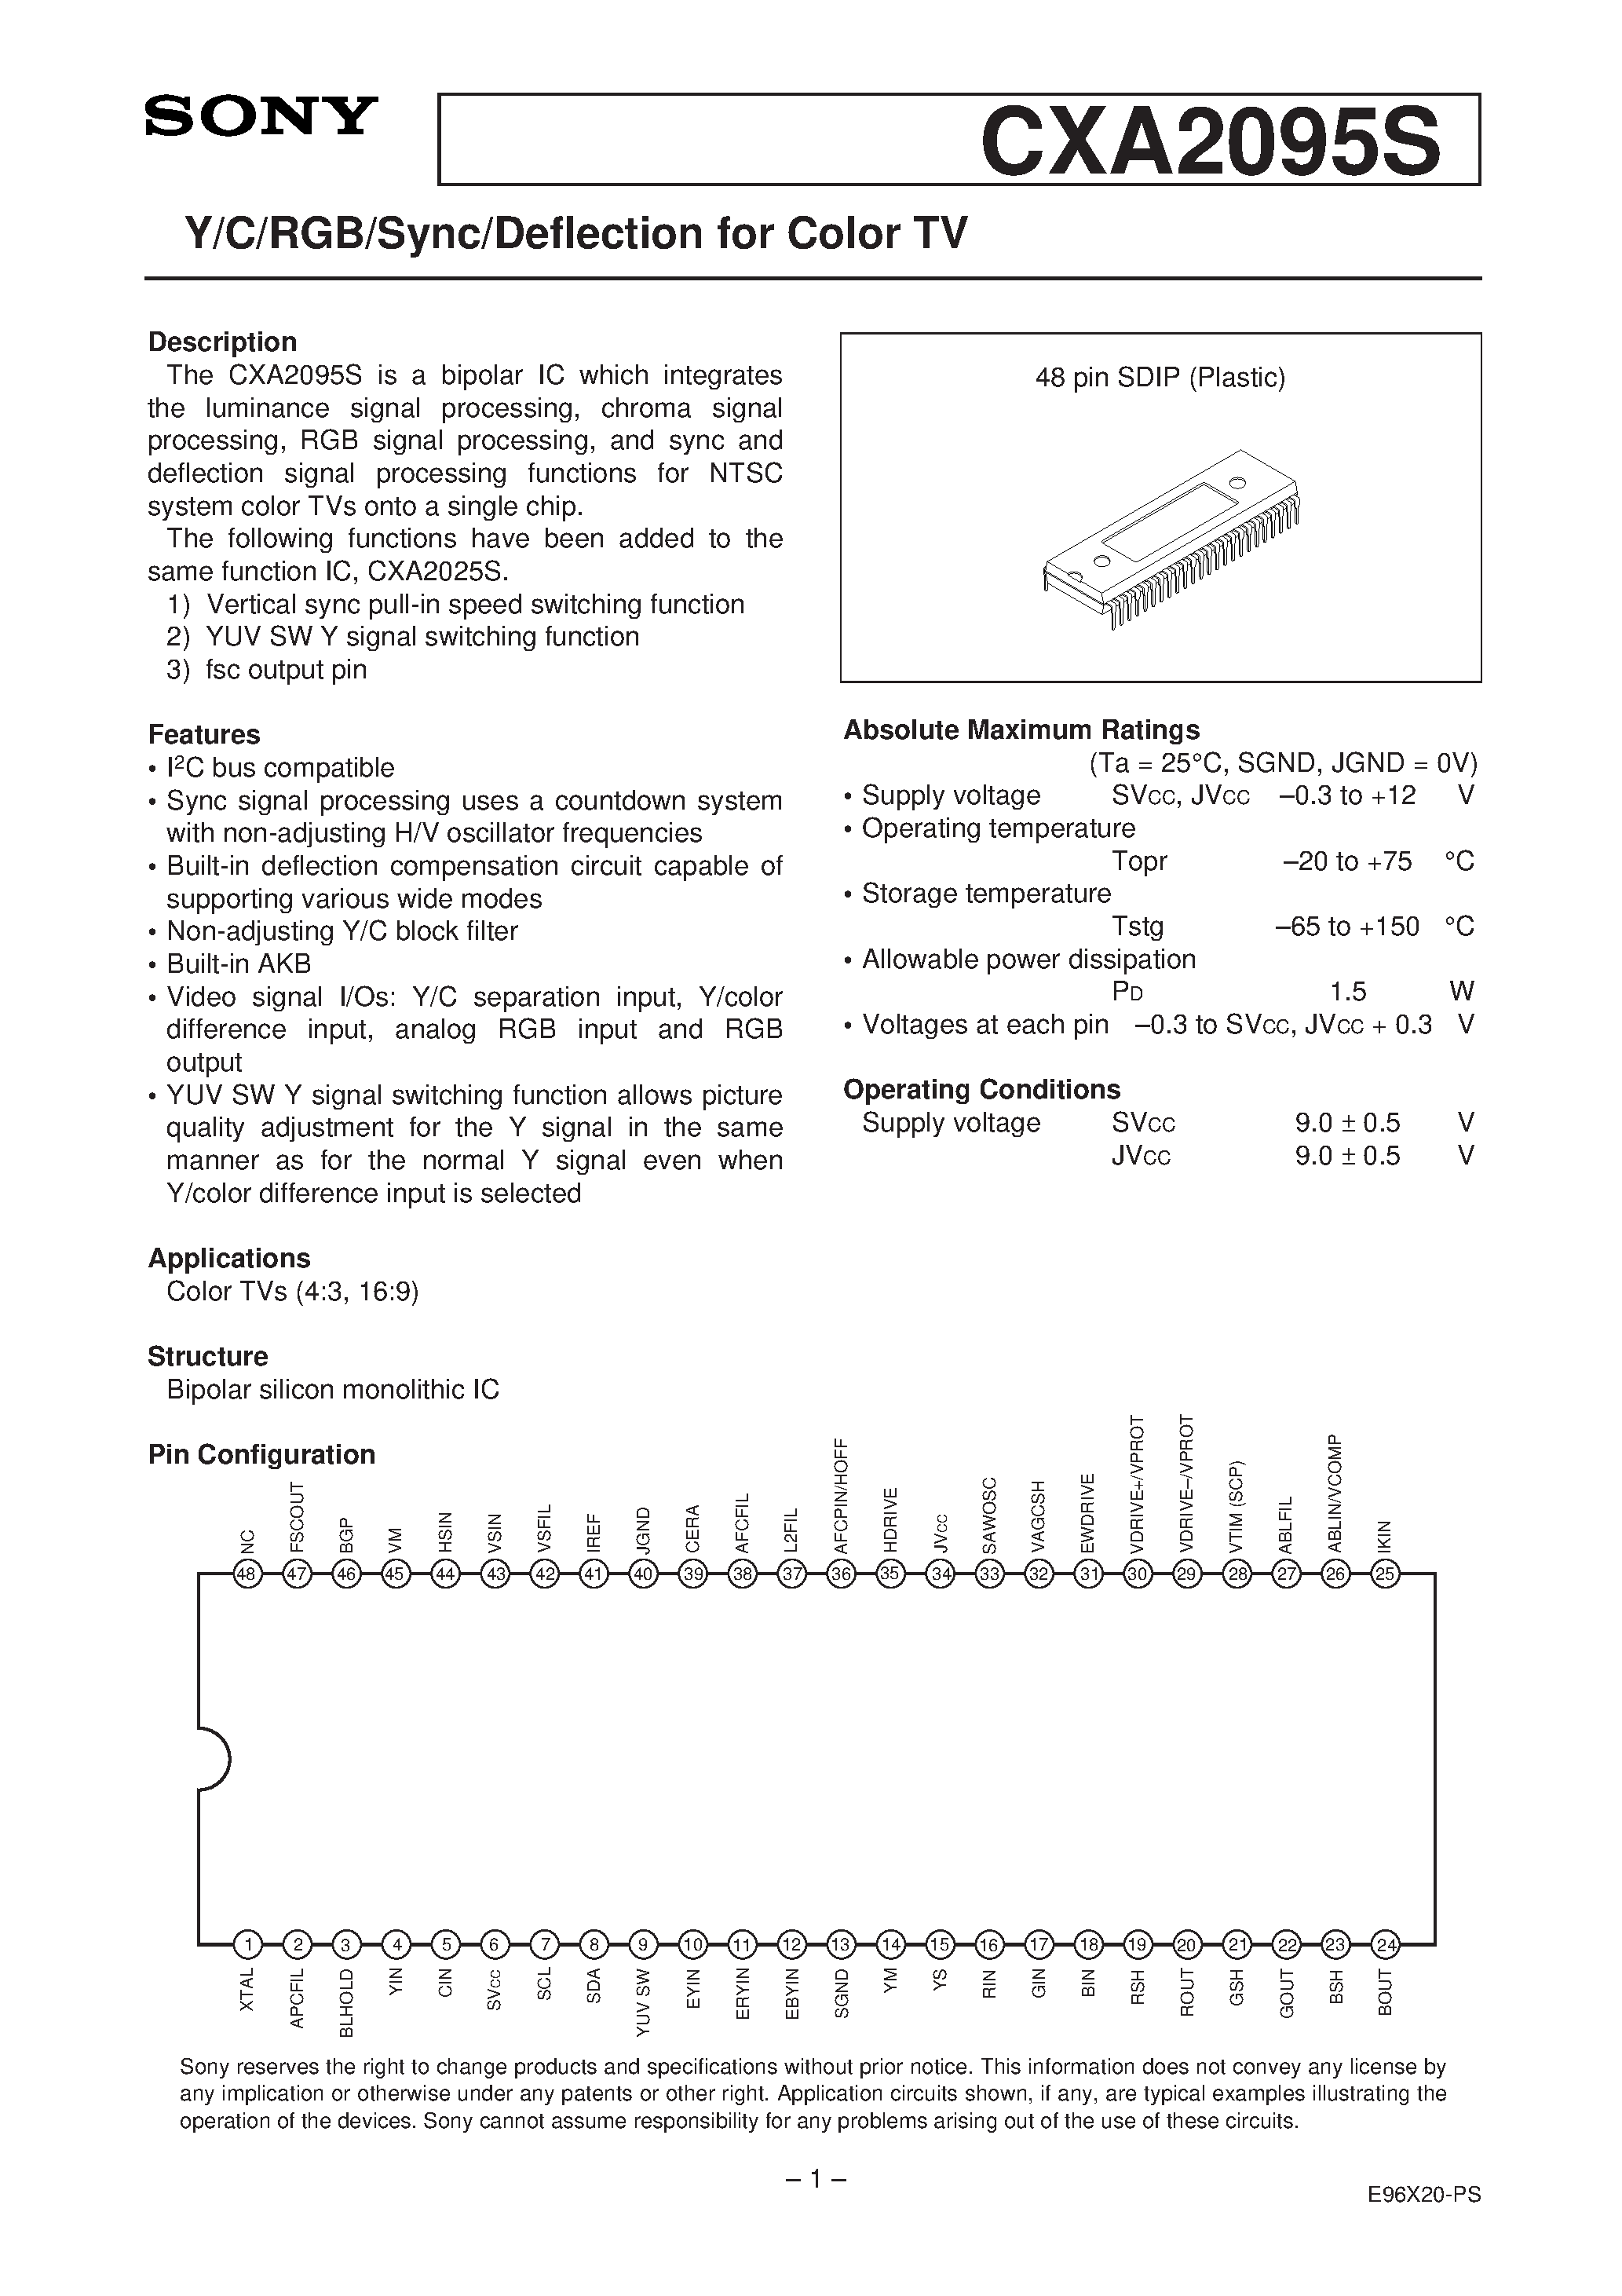 Datasheet CXA2095S - Y/C/RGB/Sync/Deflection for Color TV page 1